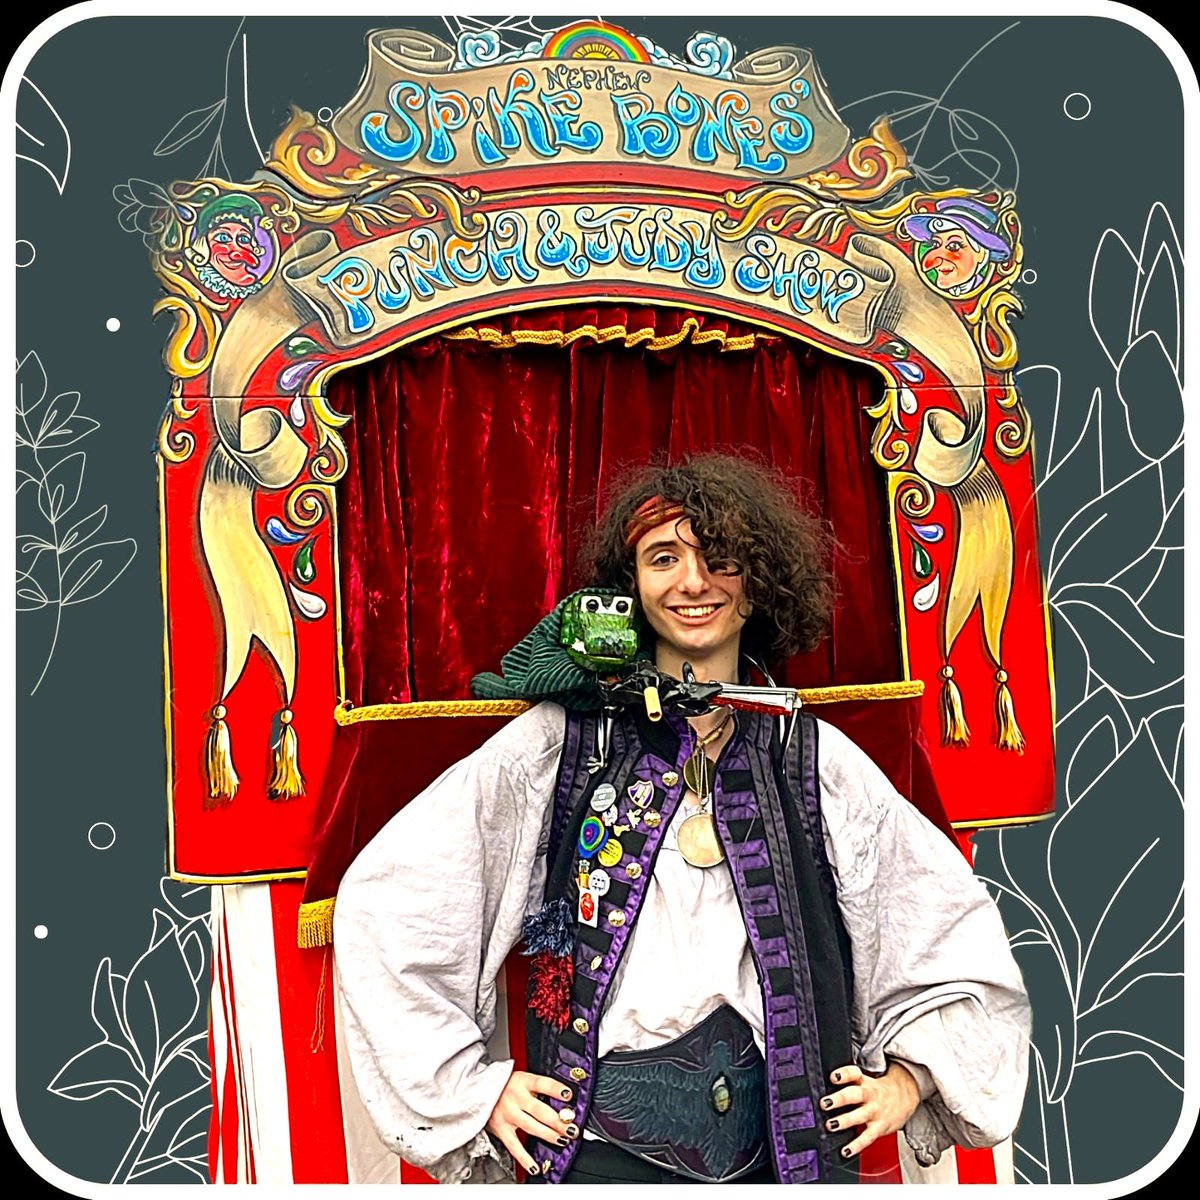 I heartily recommend that anyone and everyone who can go and see nephew Spike Bones' 'queered' Punch & Judy show at the Covent Garden May Fair on Sunday 12th May. Details of the event: alternativearts.org.uk/events/covent-…